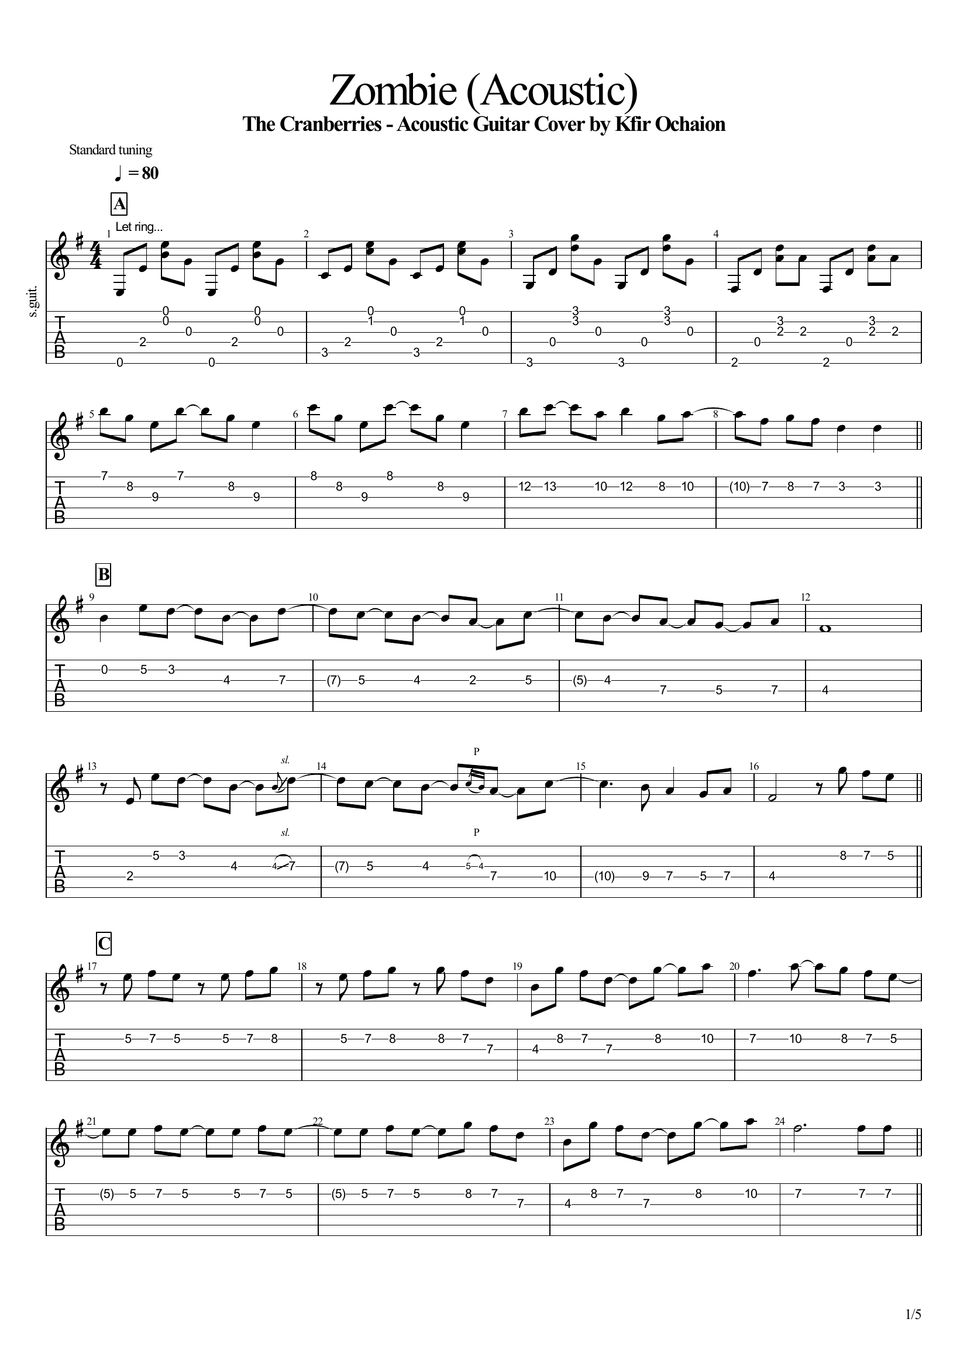 The Cranberries - Zombie  Guitar chords and lyrics, Learn guitar songs,  Guitar tutorials songs